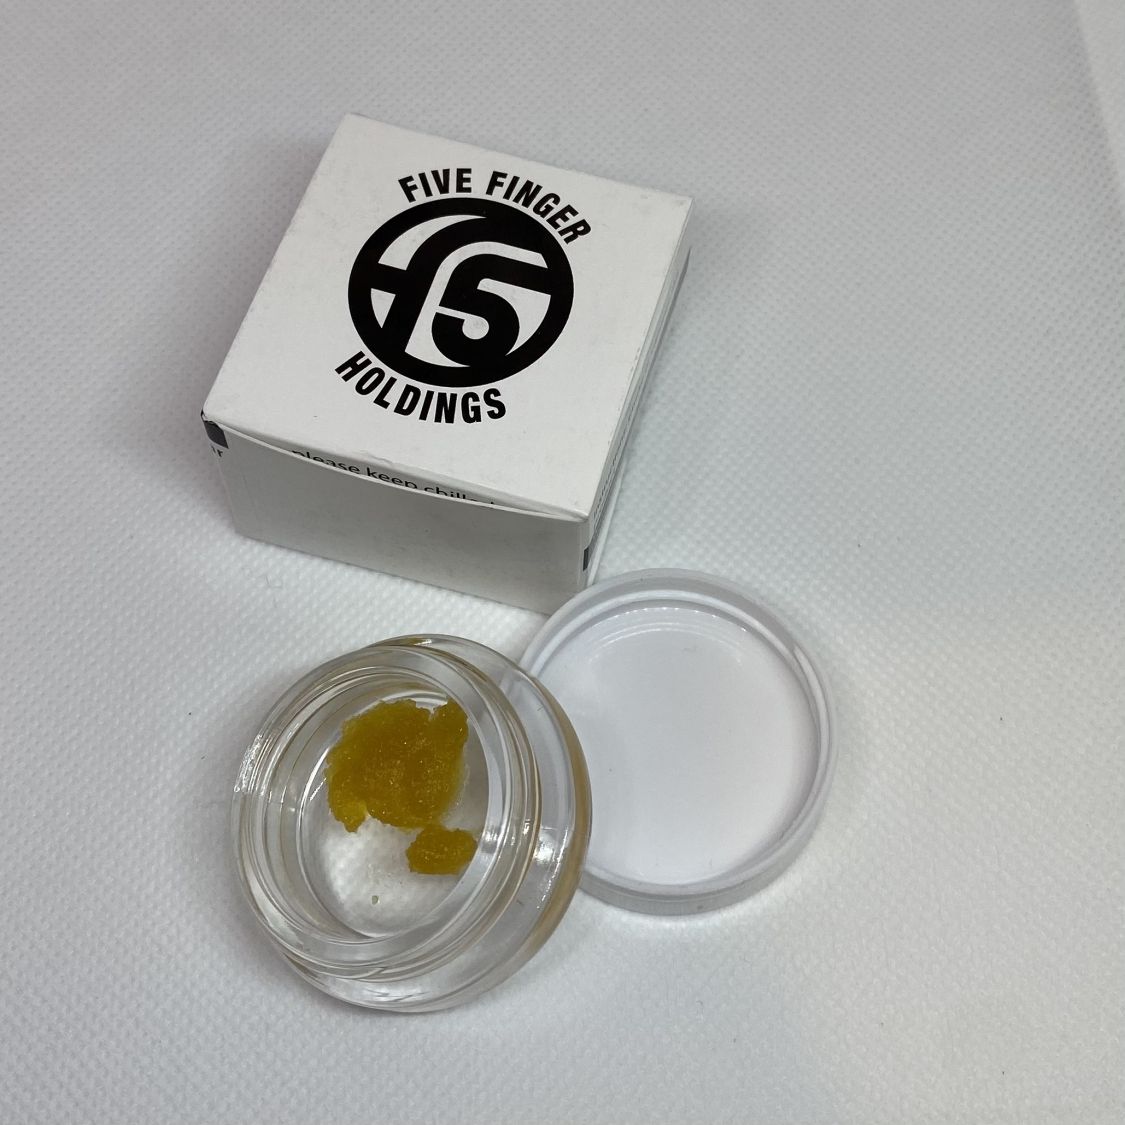  Five Finger Holdings 1g Sugar Diamonds Concentrates Concentrate